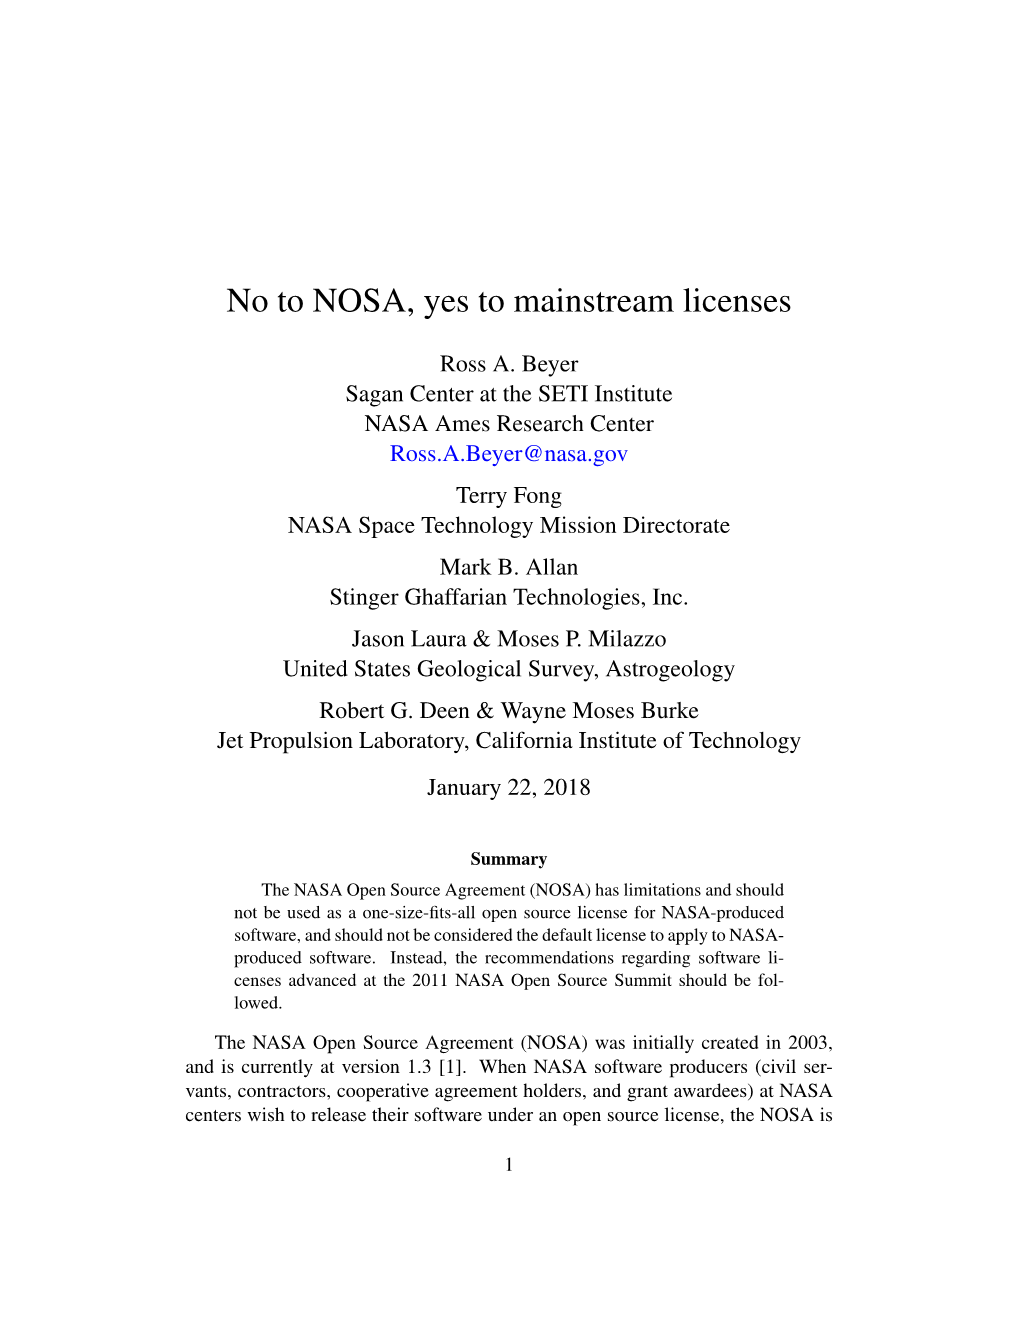 No to NOSA, Yes to Mainstream Licenses